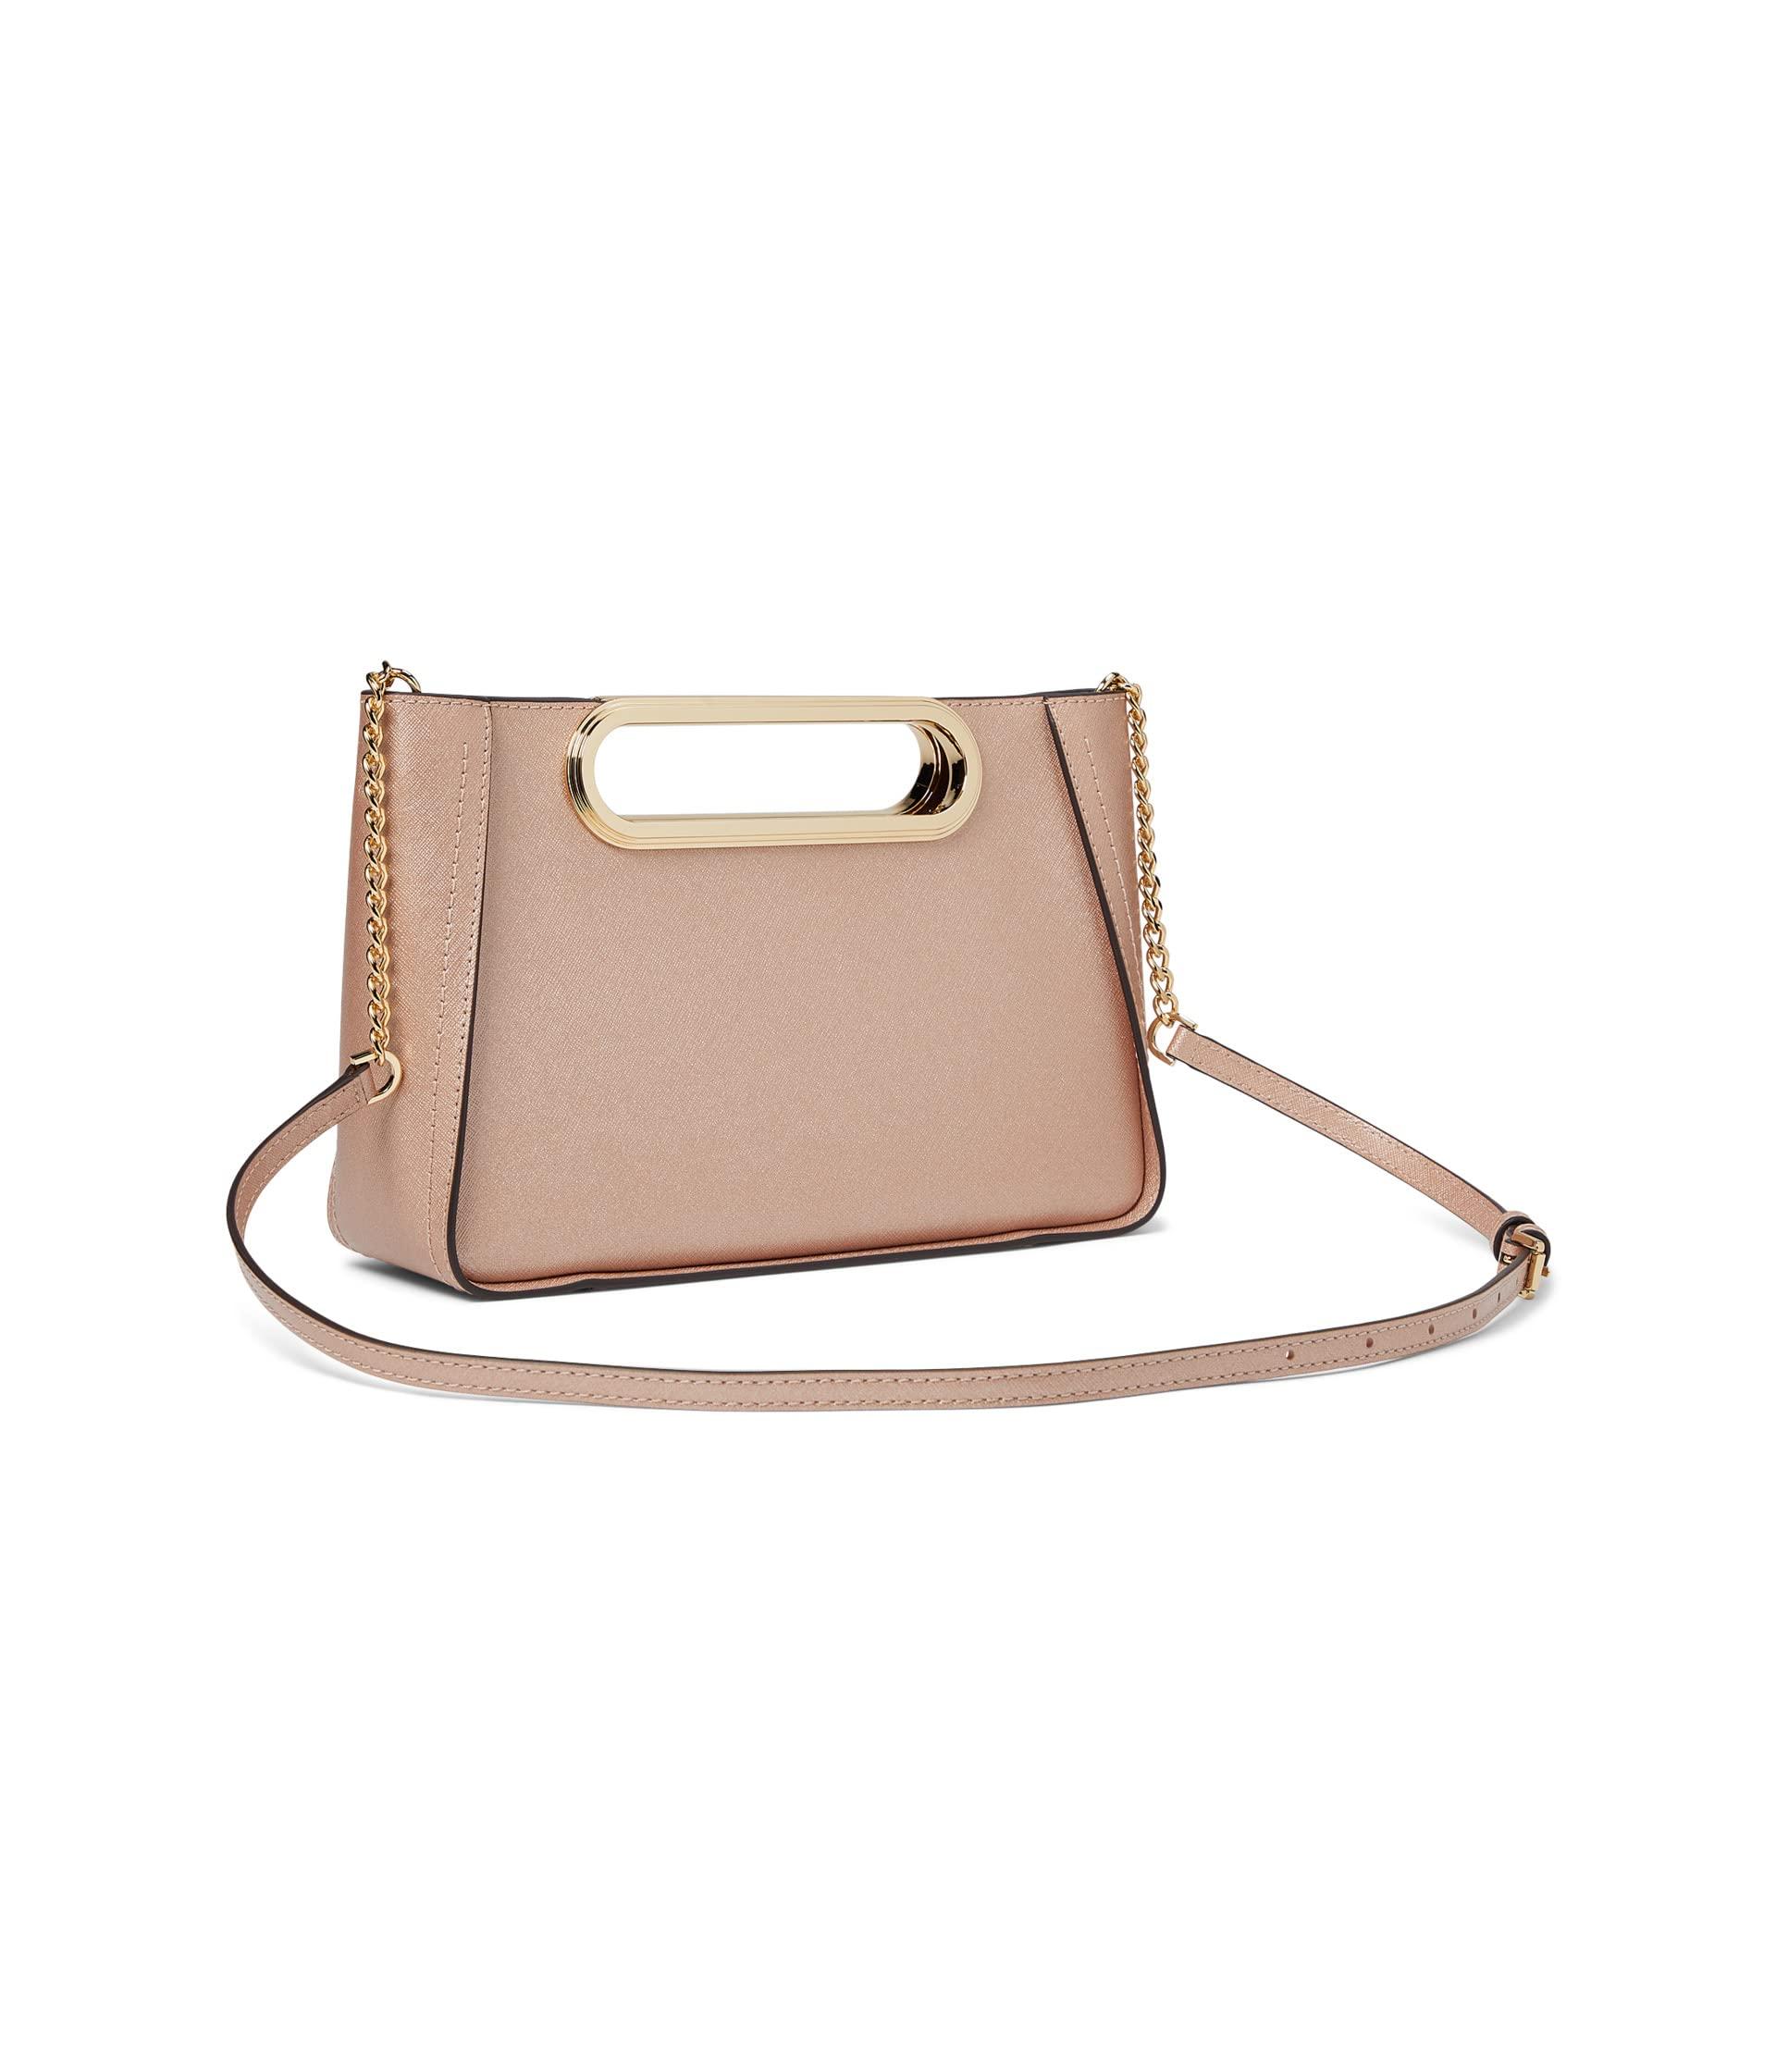 Chelsea Large Saffiano Leather Convertible Crossbody Bag